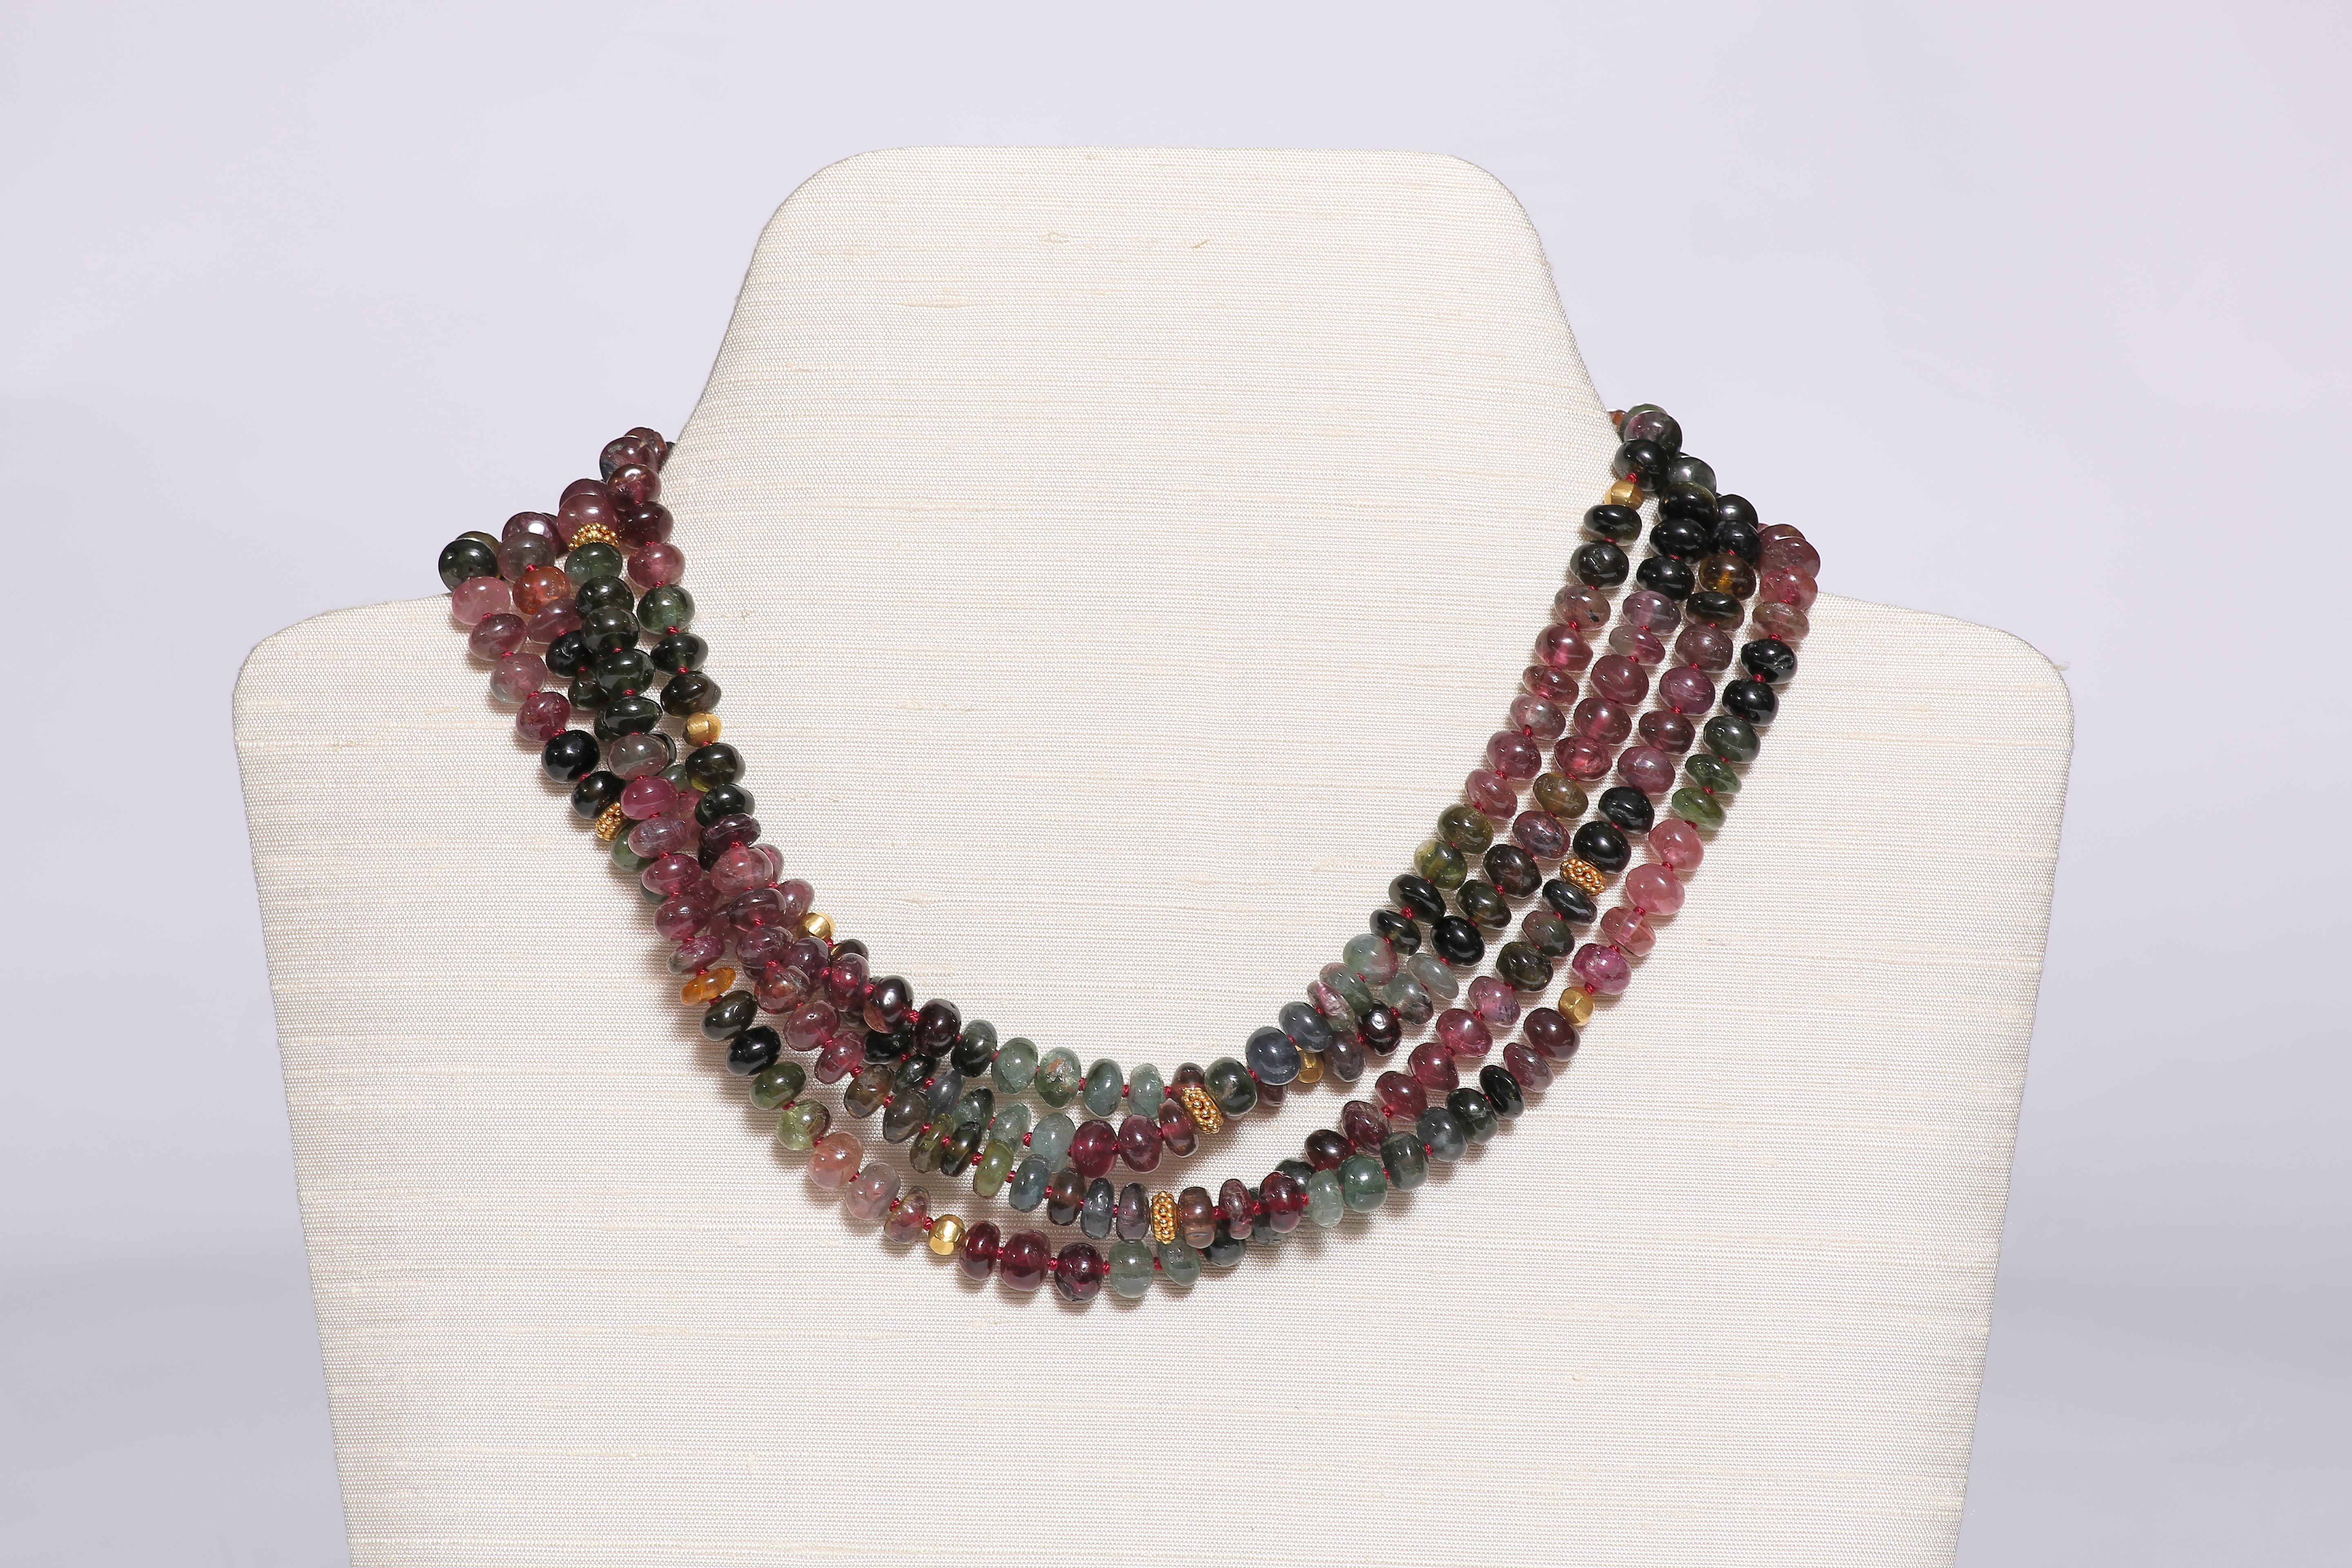 The precious long necklace is formed by 2 strings of wonderfully carved tourmaline beads, spaced with 18k gold beads. The 33